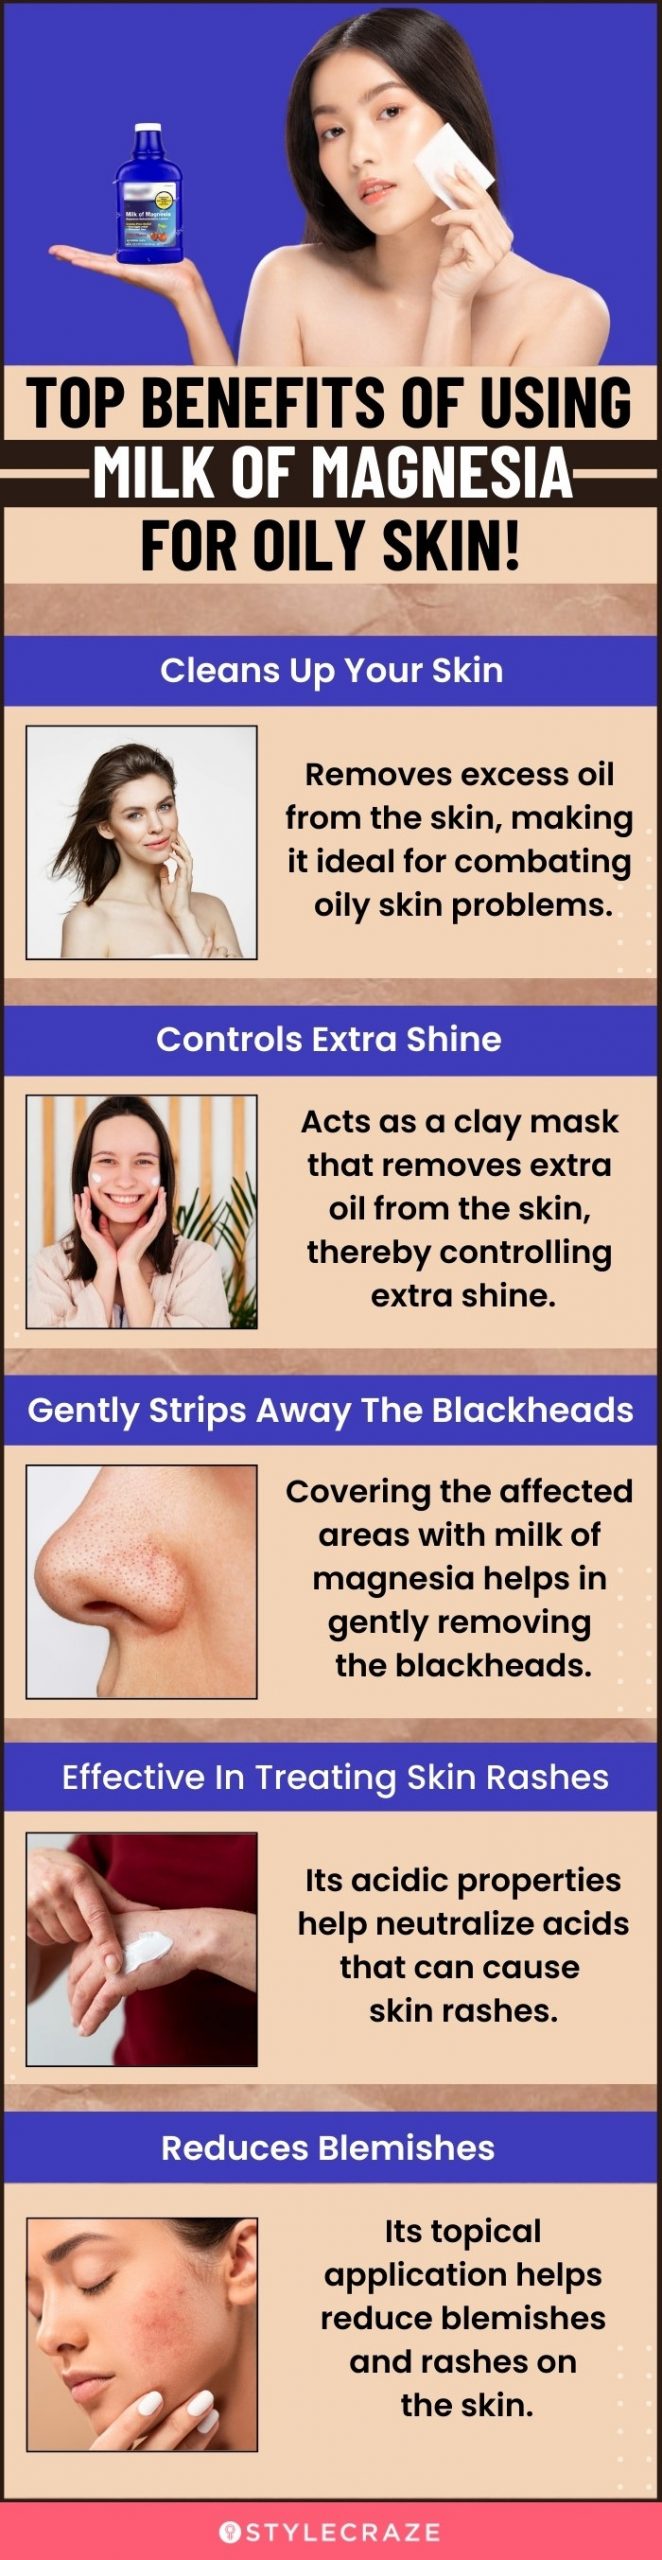 top benefits of using milk of magnesia for oily skin [infographic]